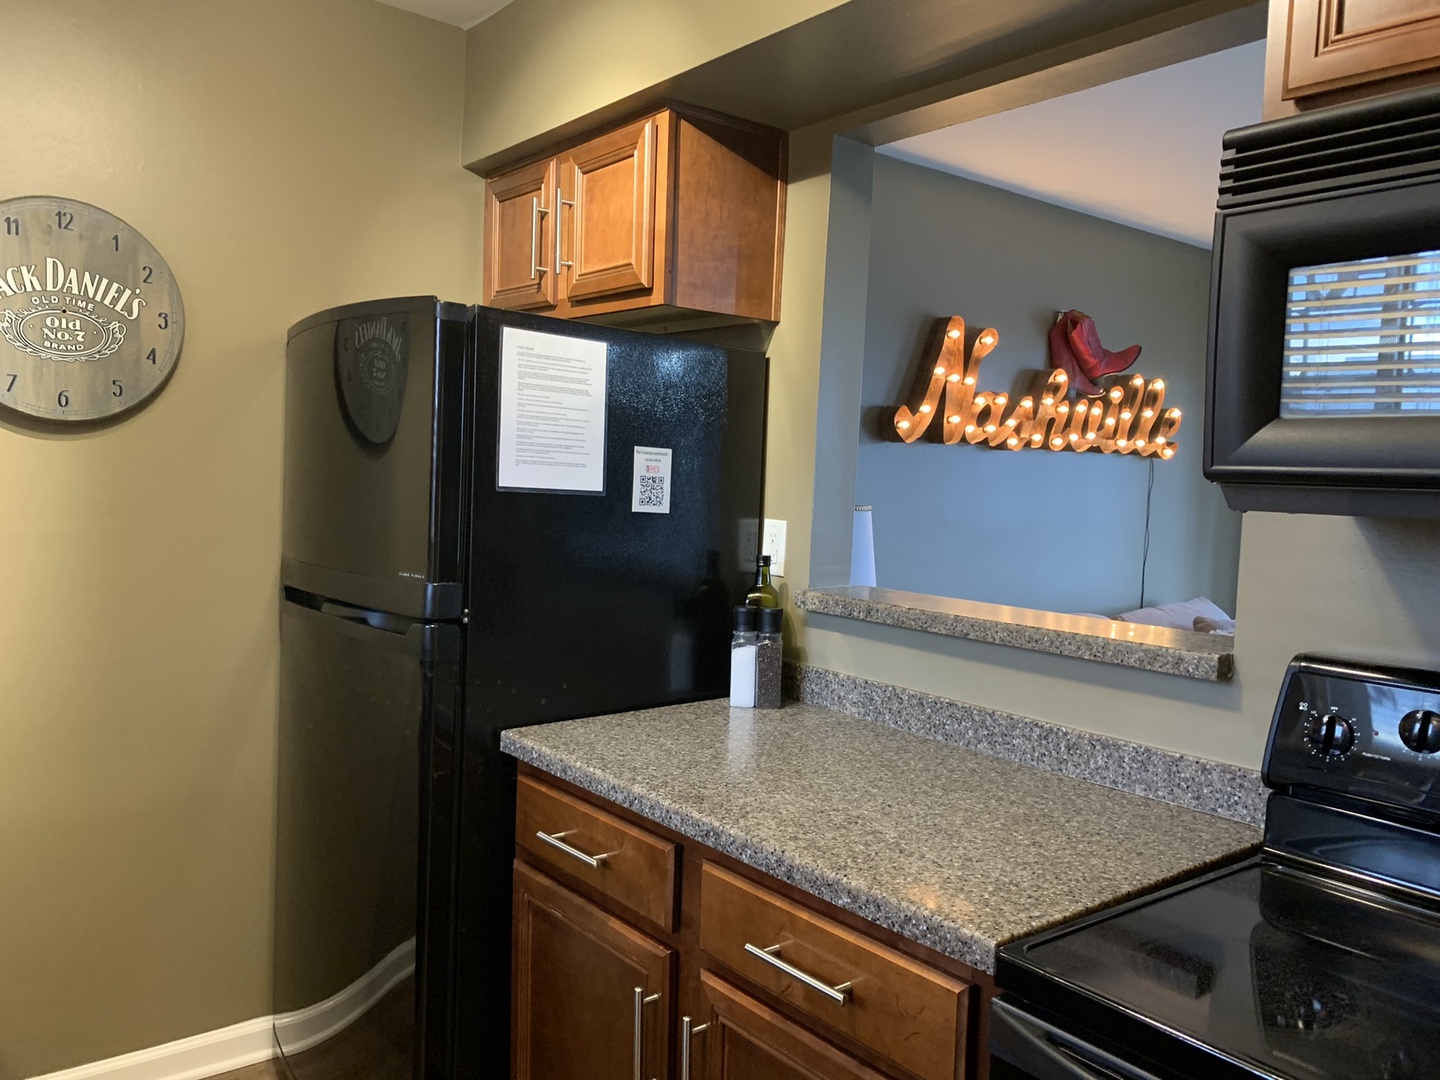 Full kitchen with coffee maker, toaster, dishwasher, and more!